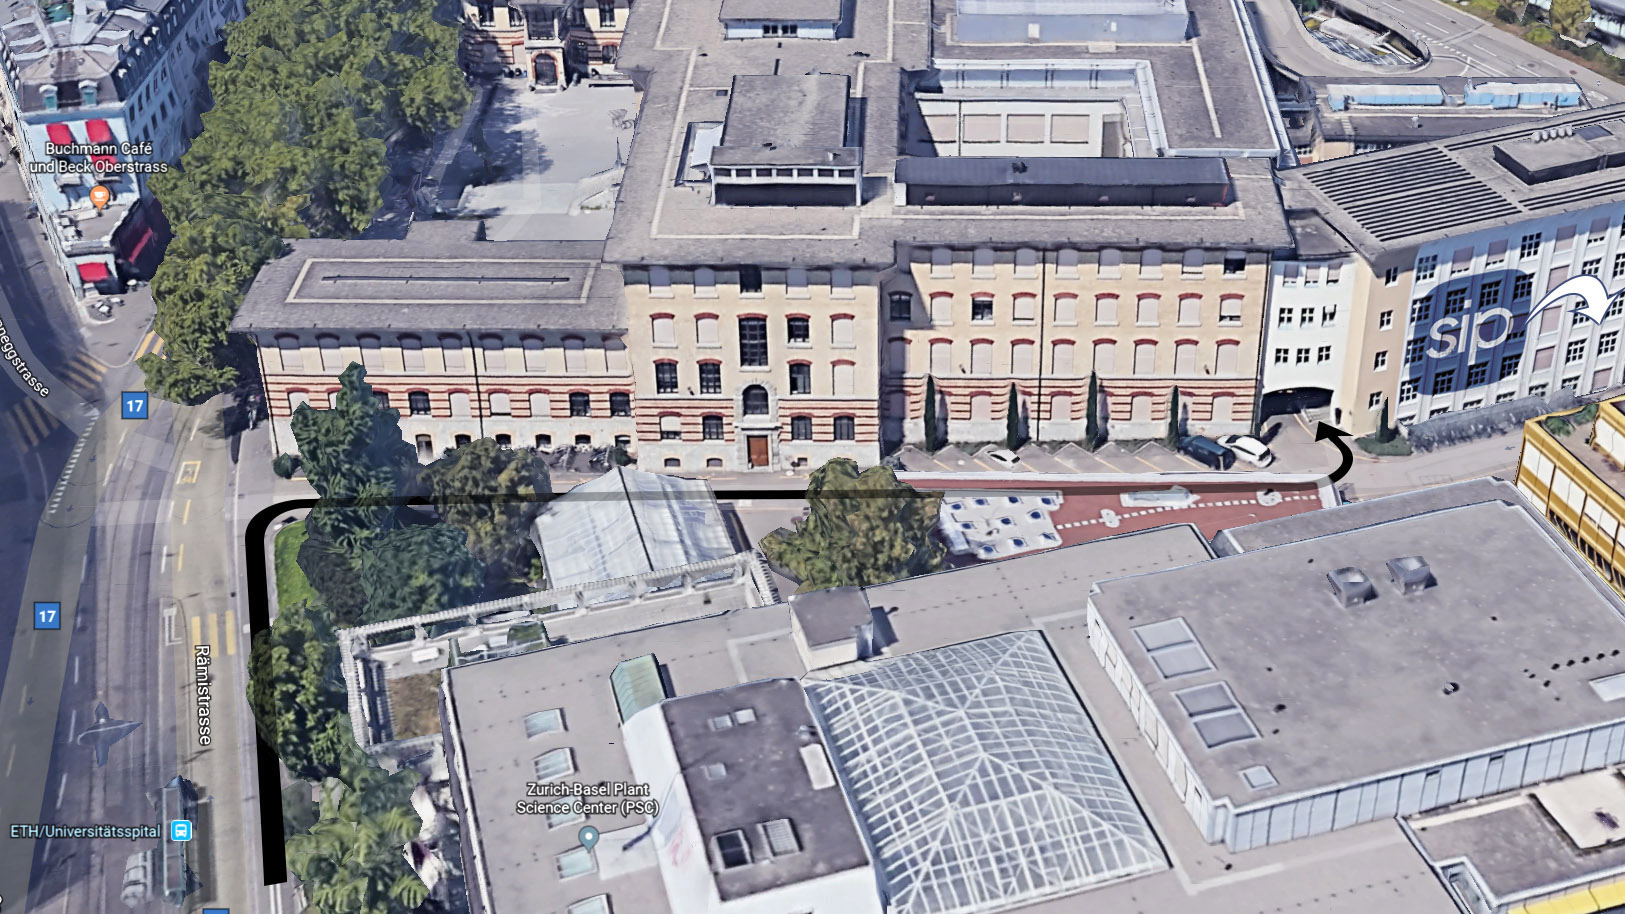 3D aerial view of walking directions to ETH CNB Building from tram station ETH/Universitätsspital